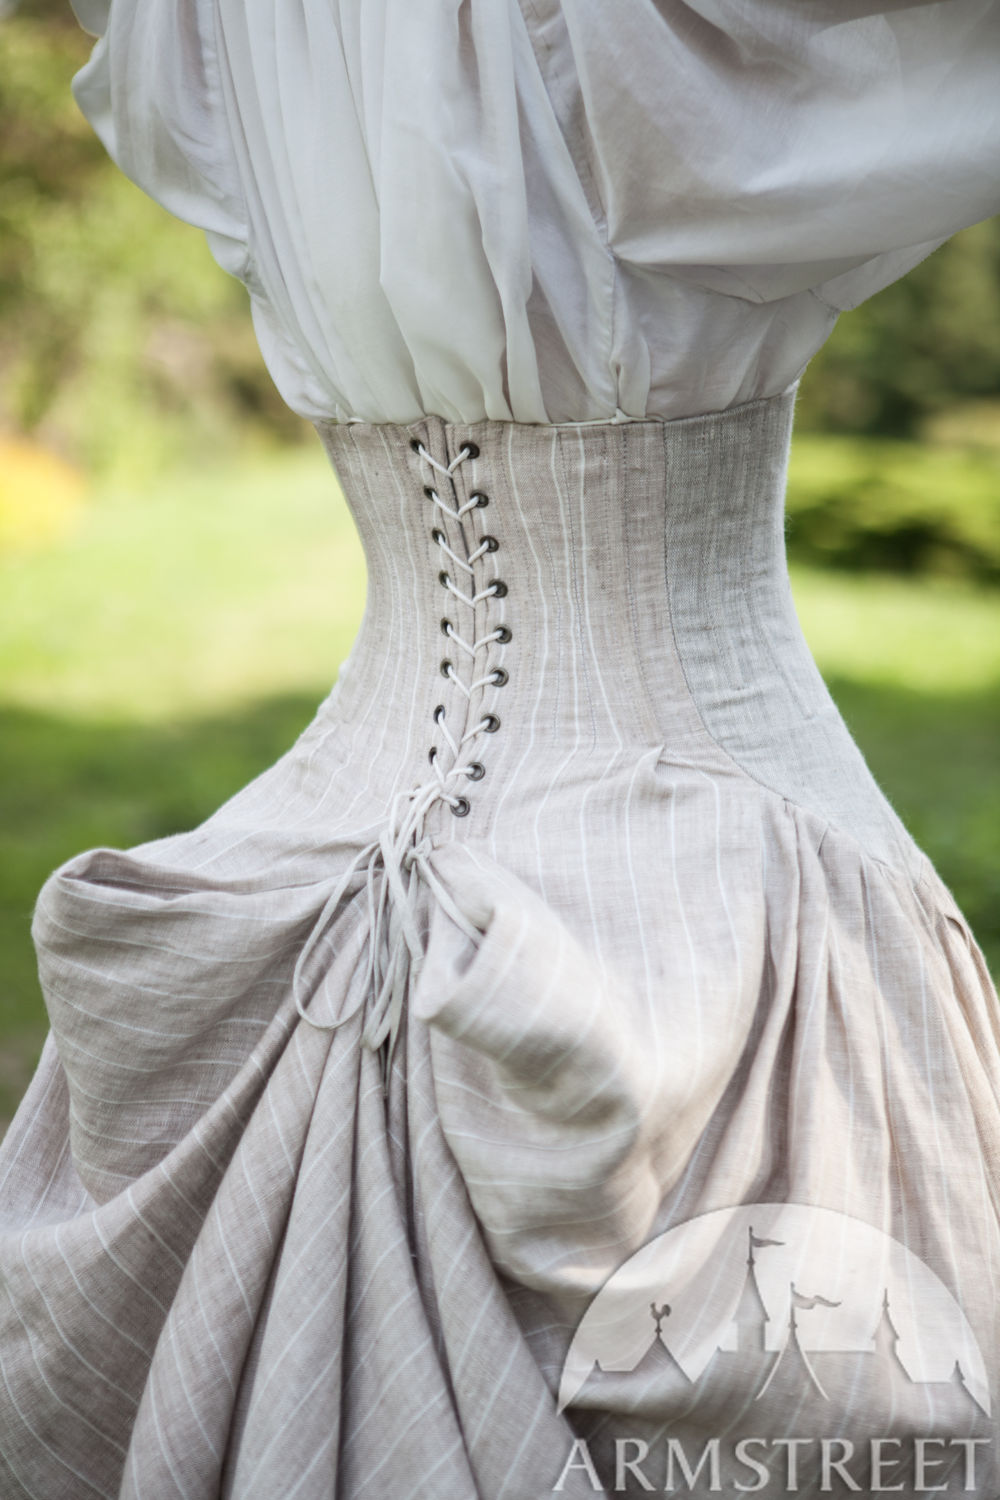 The noble look of the corset skirt Snow White